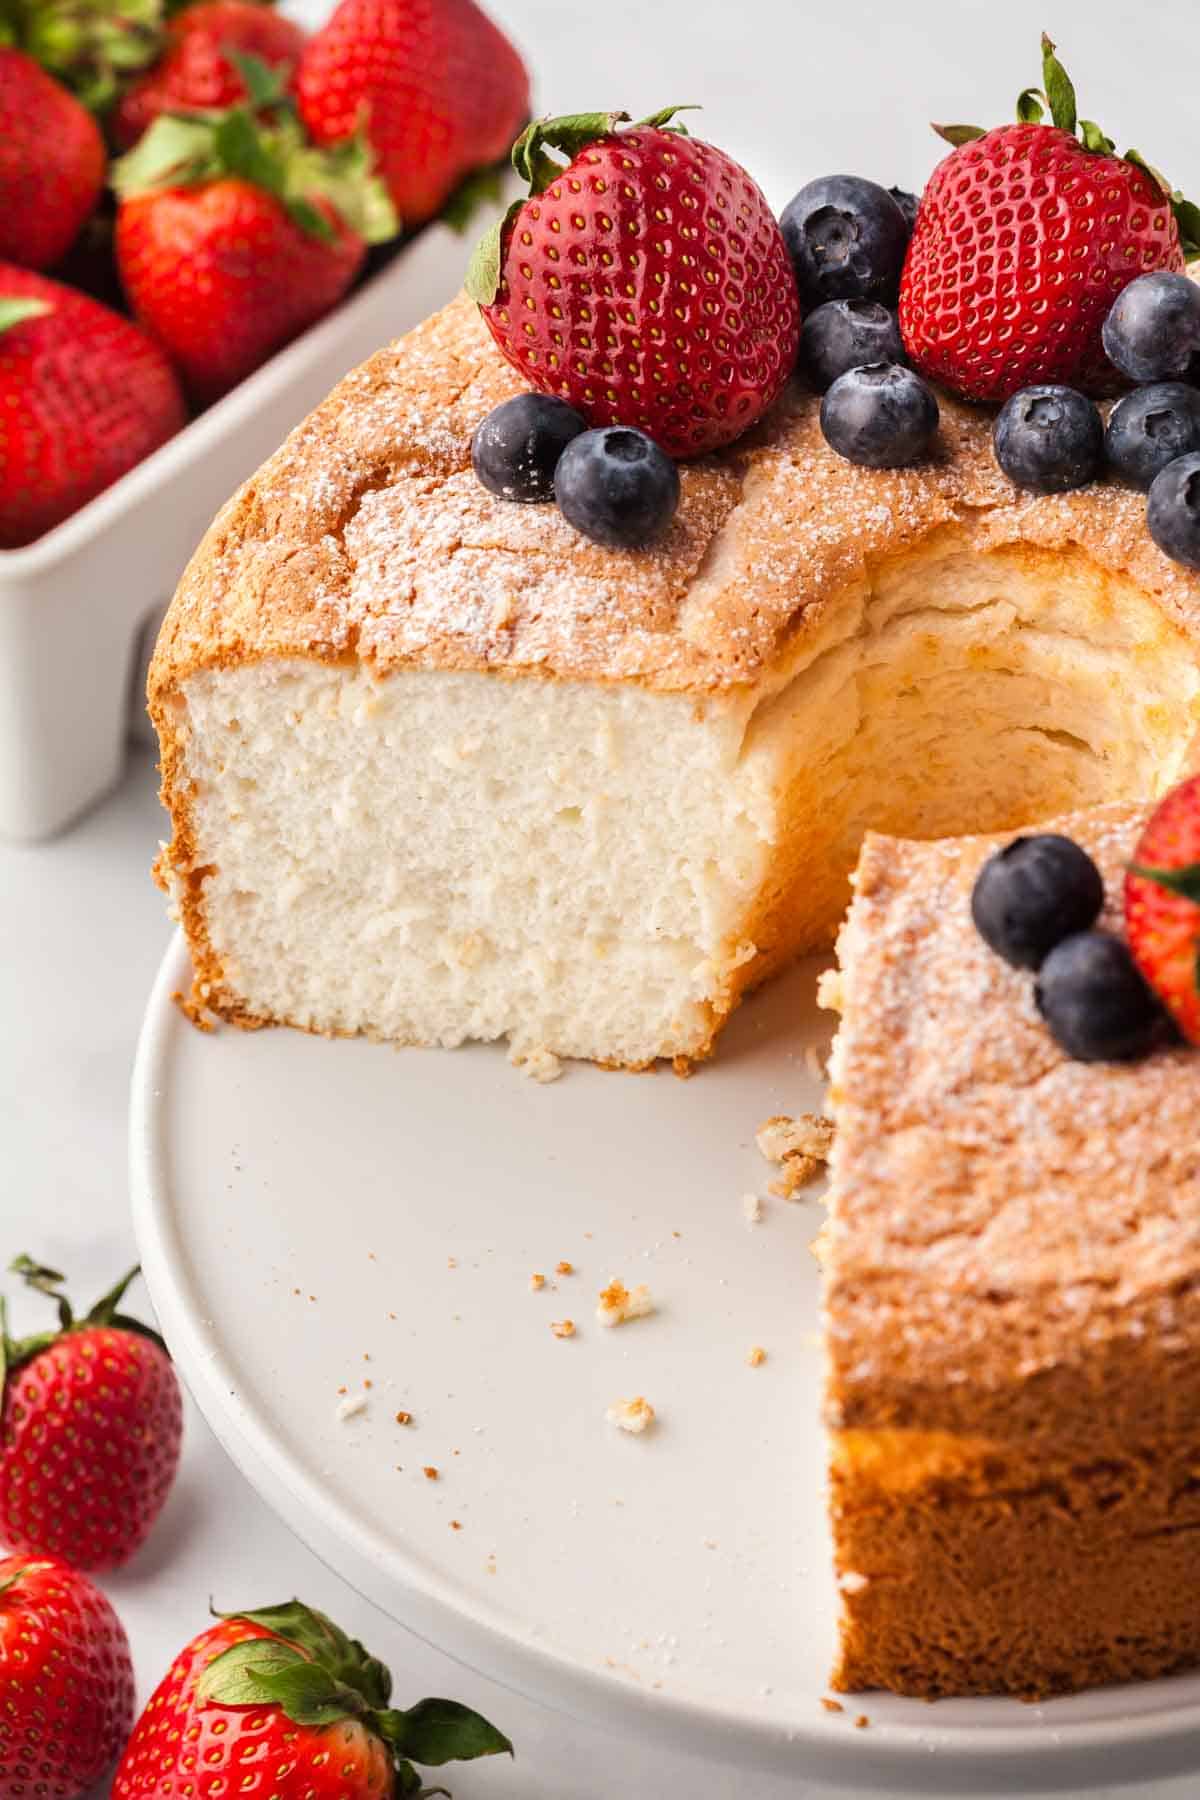 A gluten-free angel food cake is shown on a cake stand topped with strawberries and blueberries.